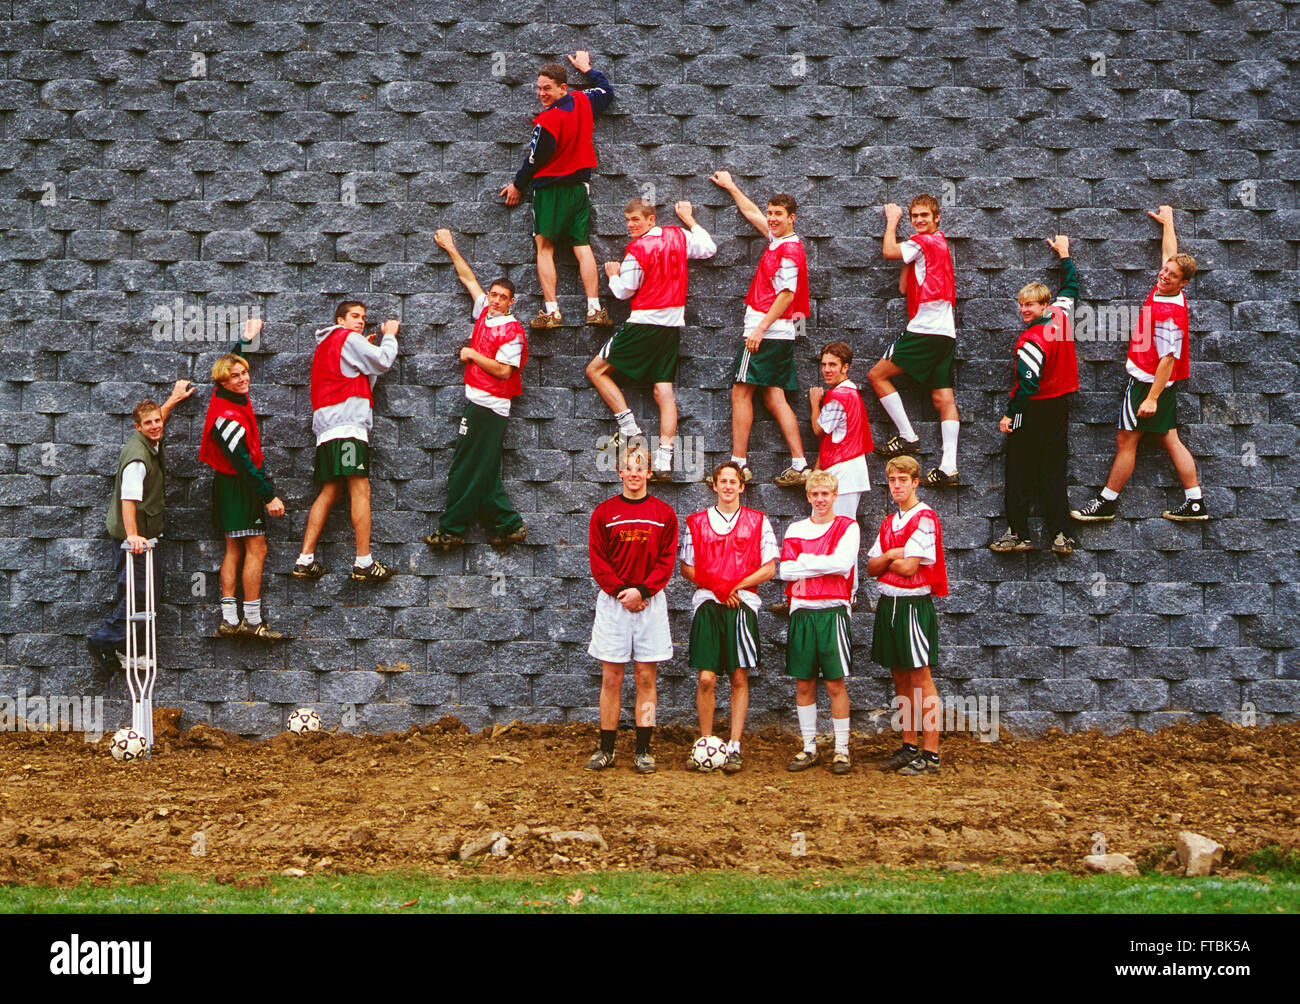 Team portrait of boy's high school student soccer team posed on wall Stock Photo